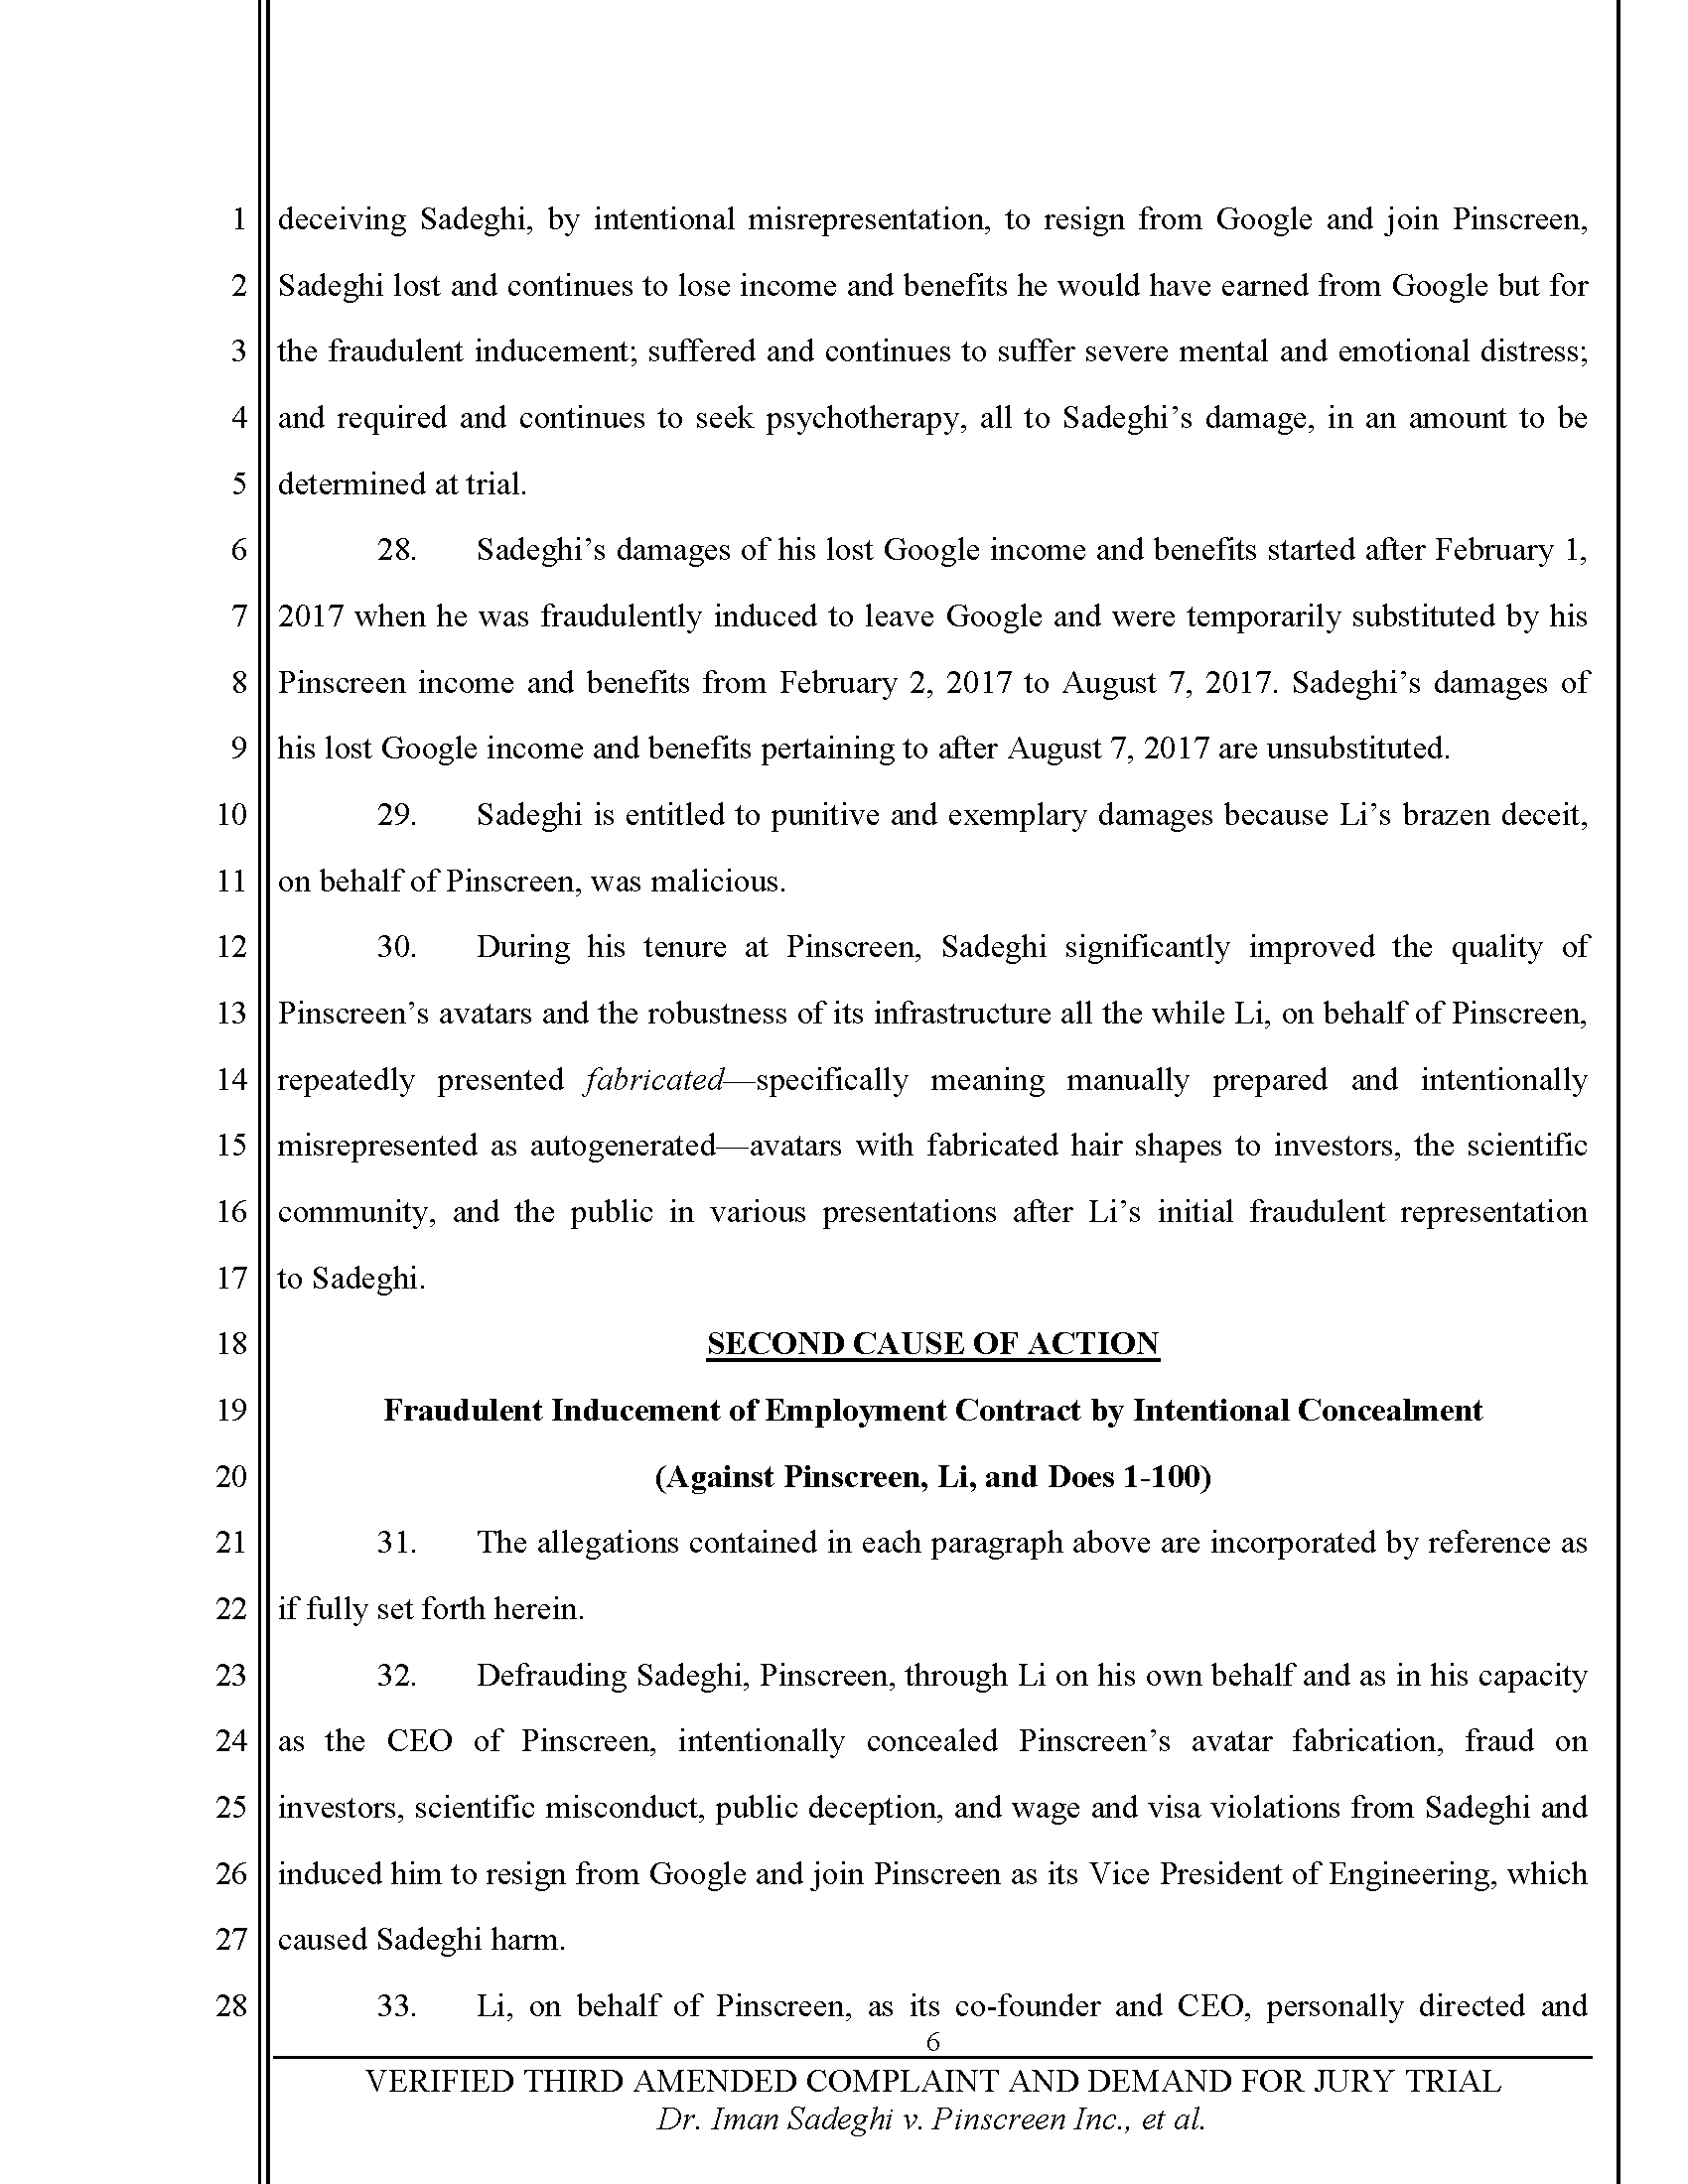 Third Amended Complaint (TAC) Page 7